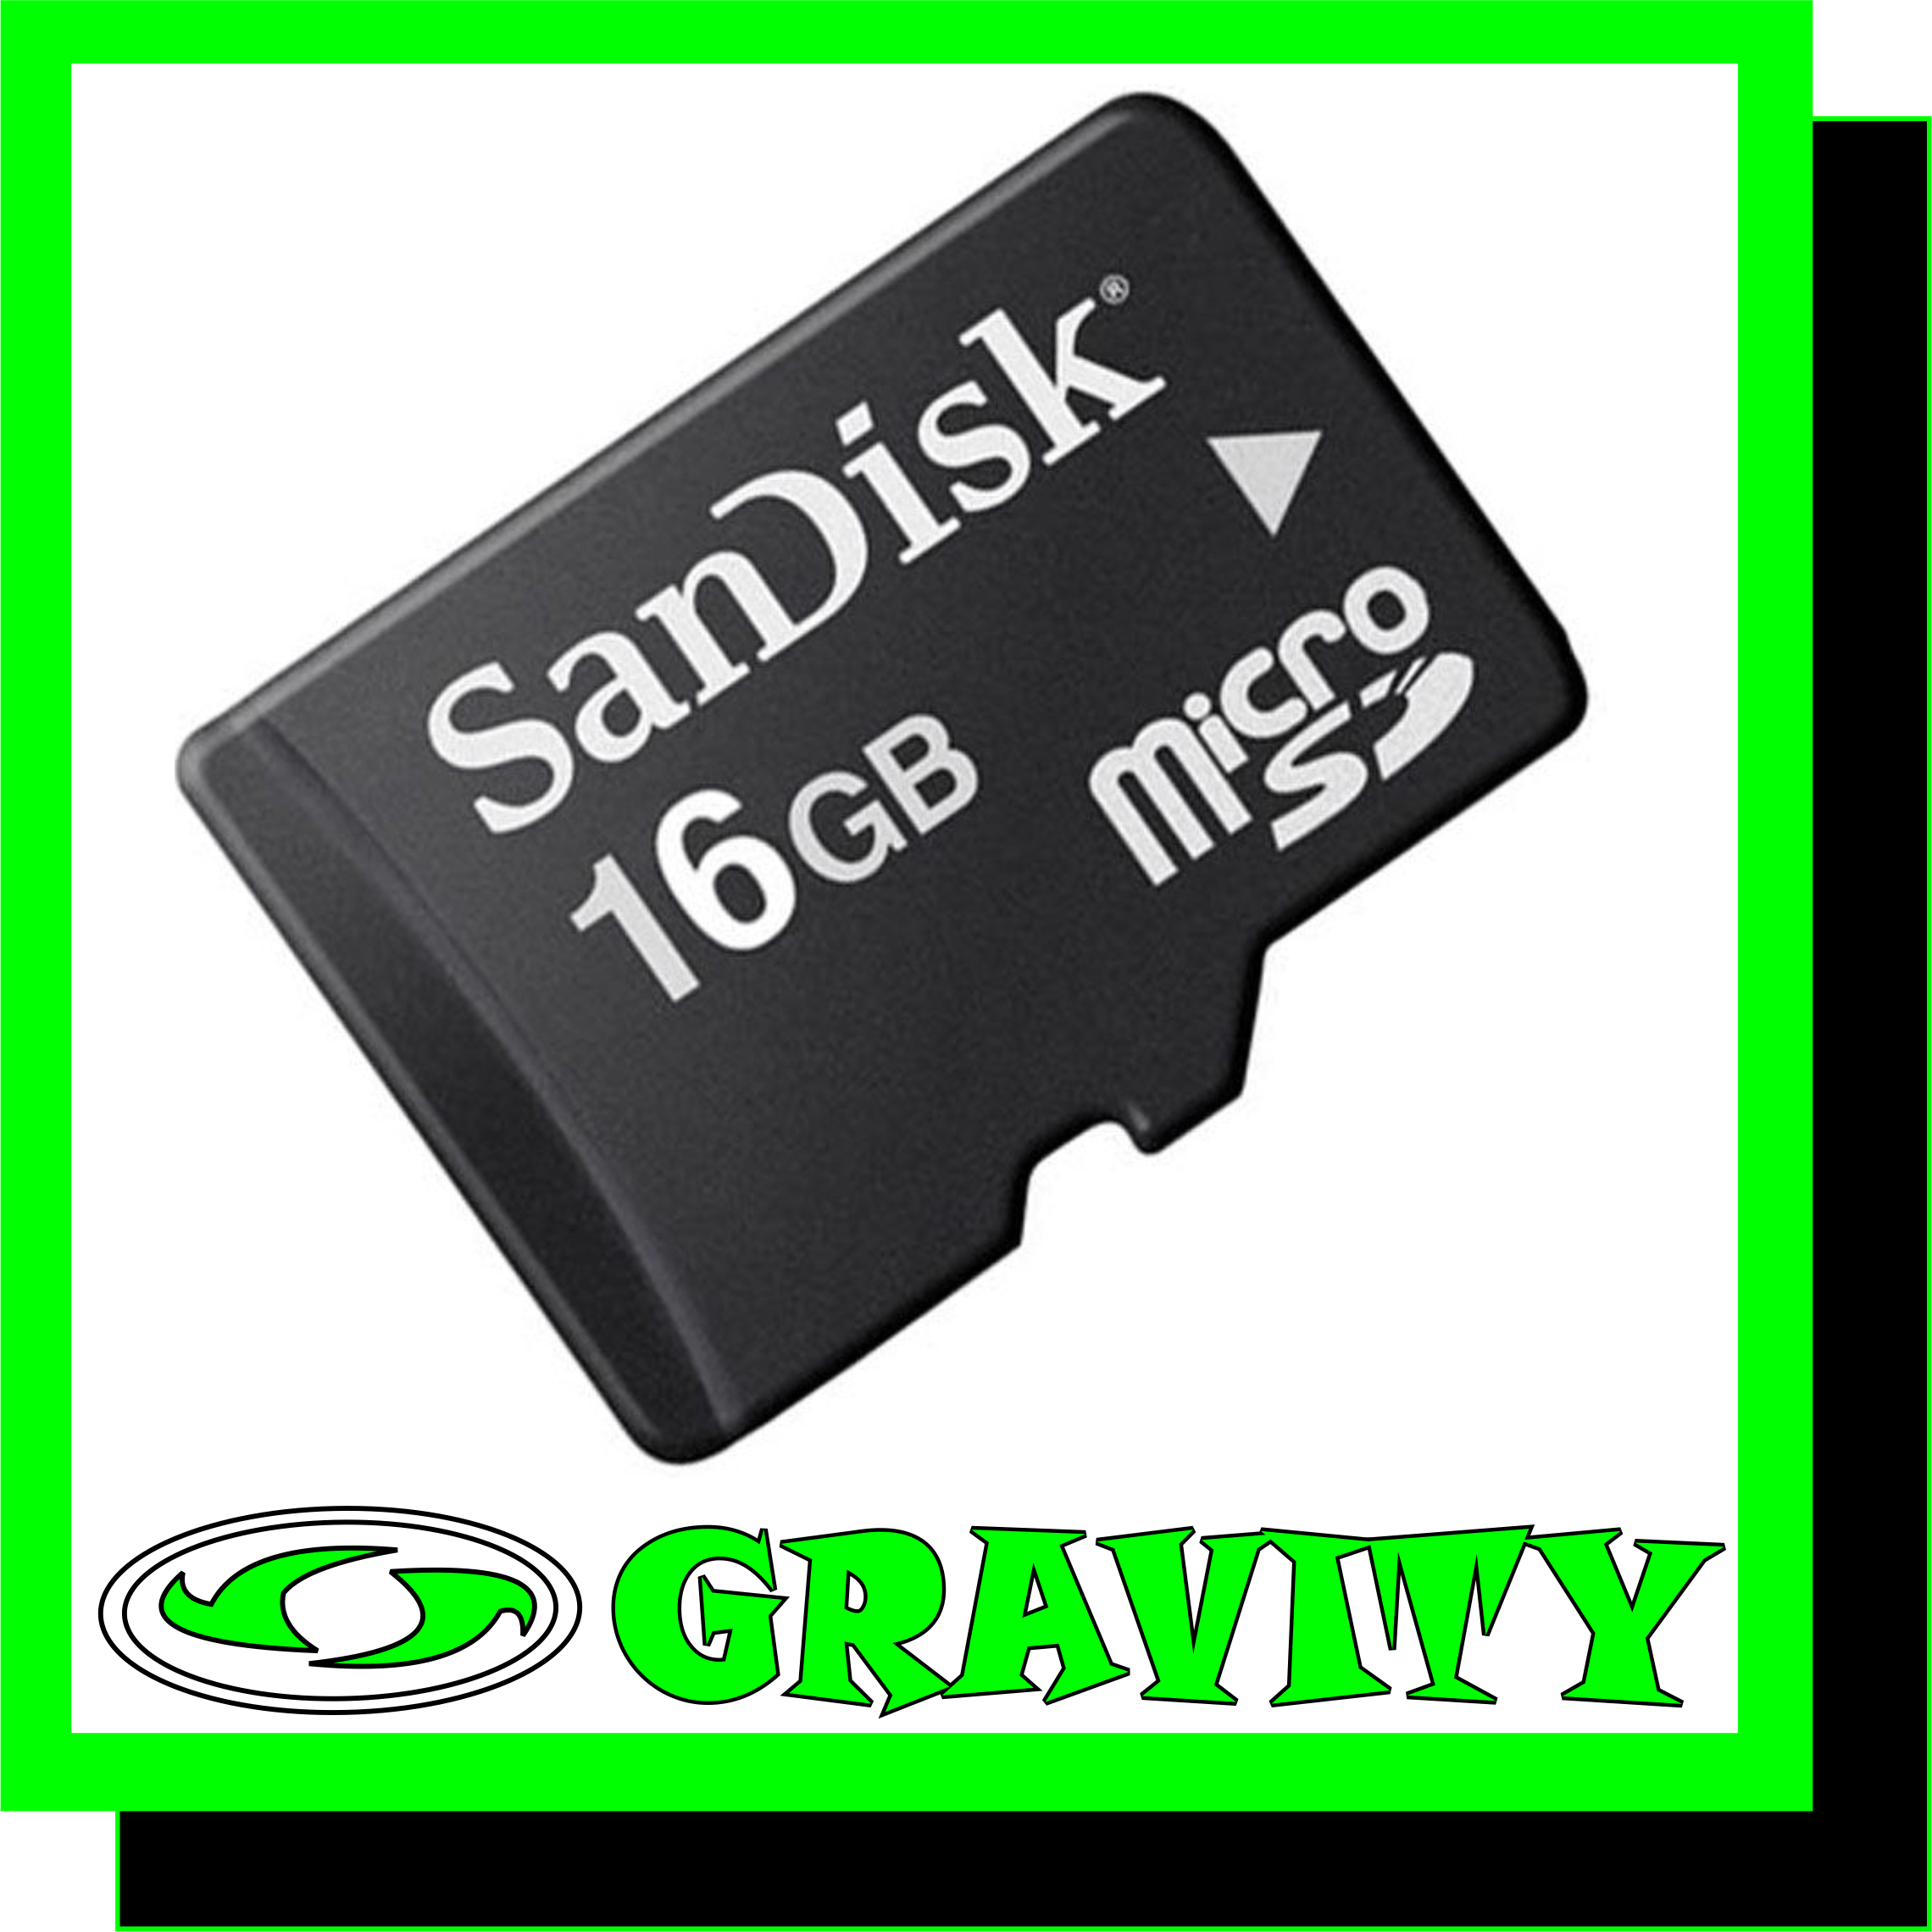 SanDisk is proud to announce our newest format and capacity to the SD card family: microSD High Capacity (microSDHC) 16GB flash card.  Features: - High storage capacity (16GB) for storing essential digital content such as high quality photos, videos, music and more - Optimal speed and performance for microSDHC compatible devices - Speed performance rating: Class 4 (based on SD 2.00 Specification) - High Quality microSDHC card backed by 5-year limited warranty - Built to last, with an operating shock rating of 2000Gs, equivalent to a ten-foot drop